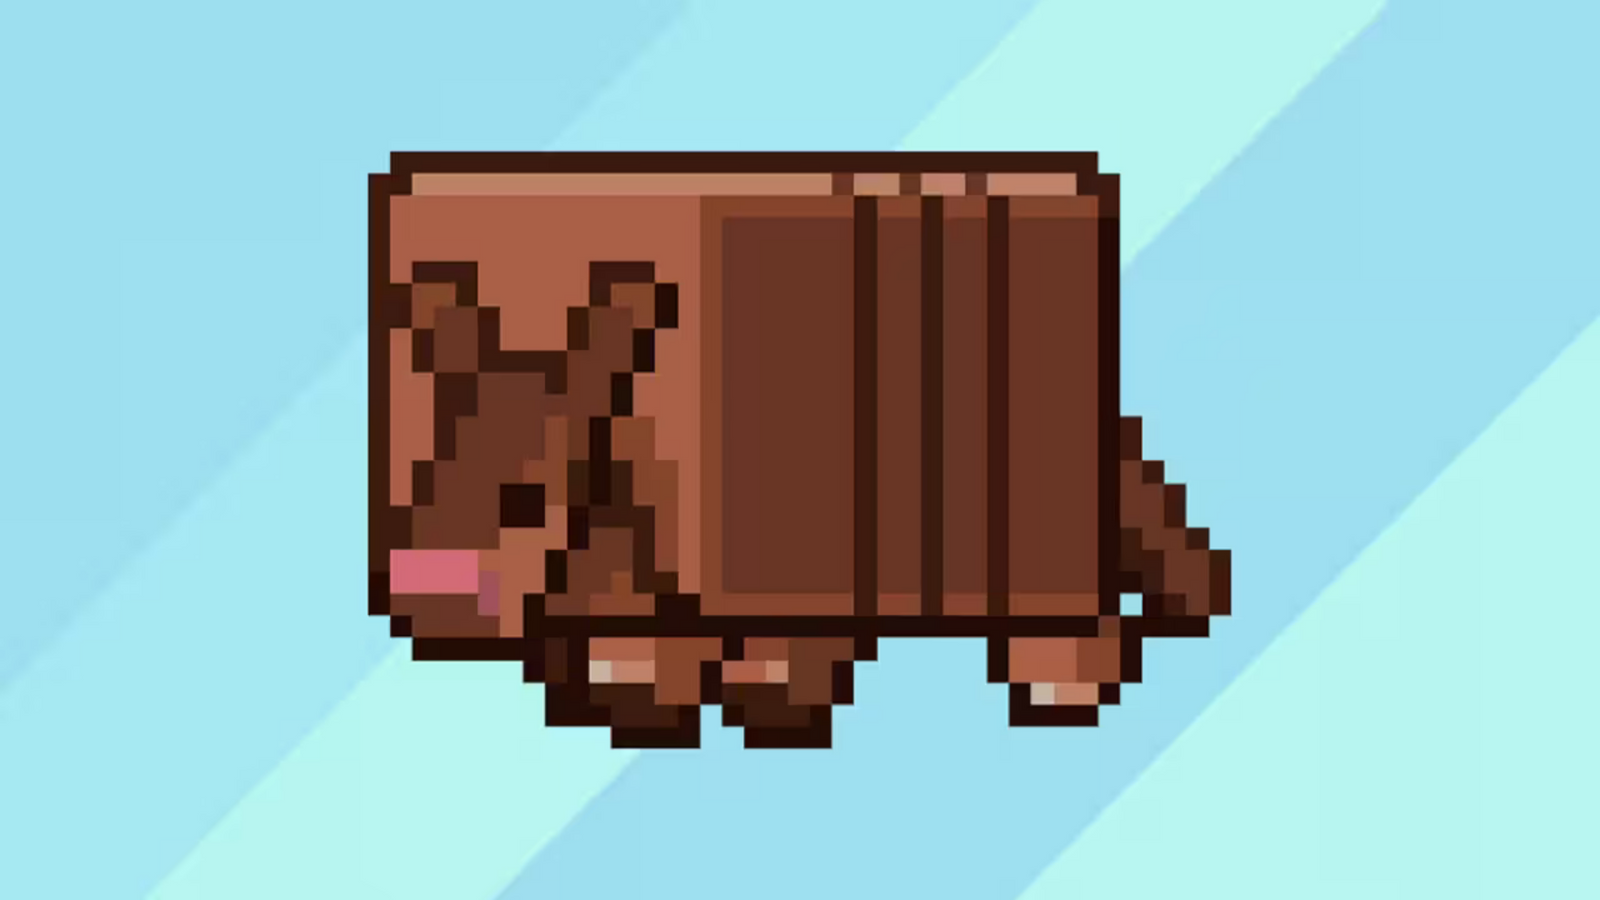 Art of an armadillo stylised as a Minecraft character